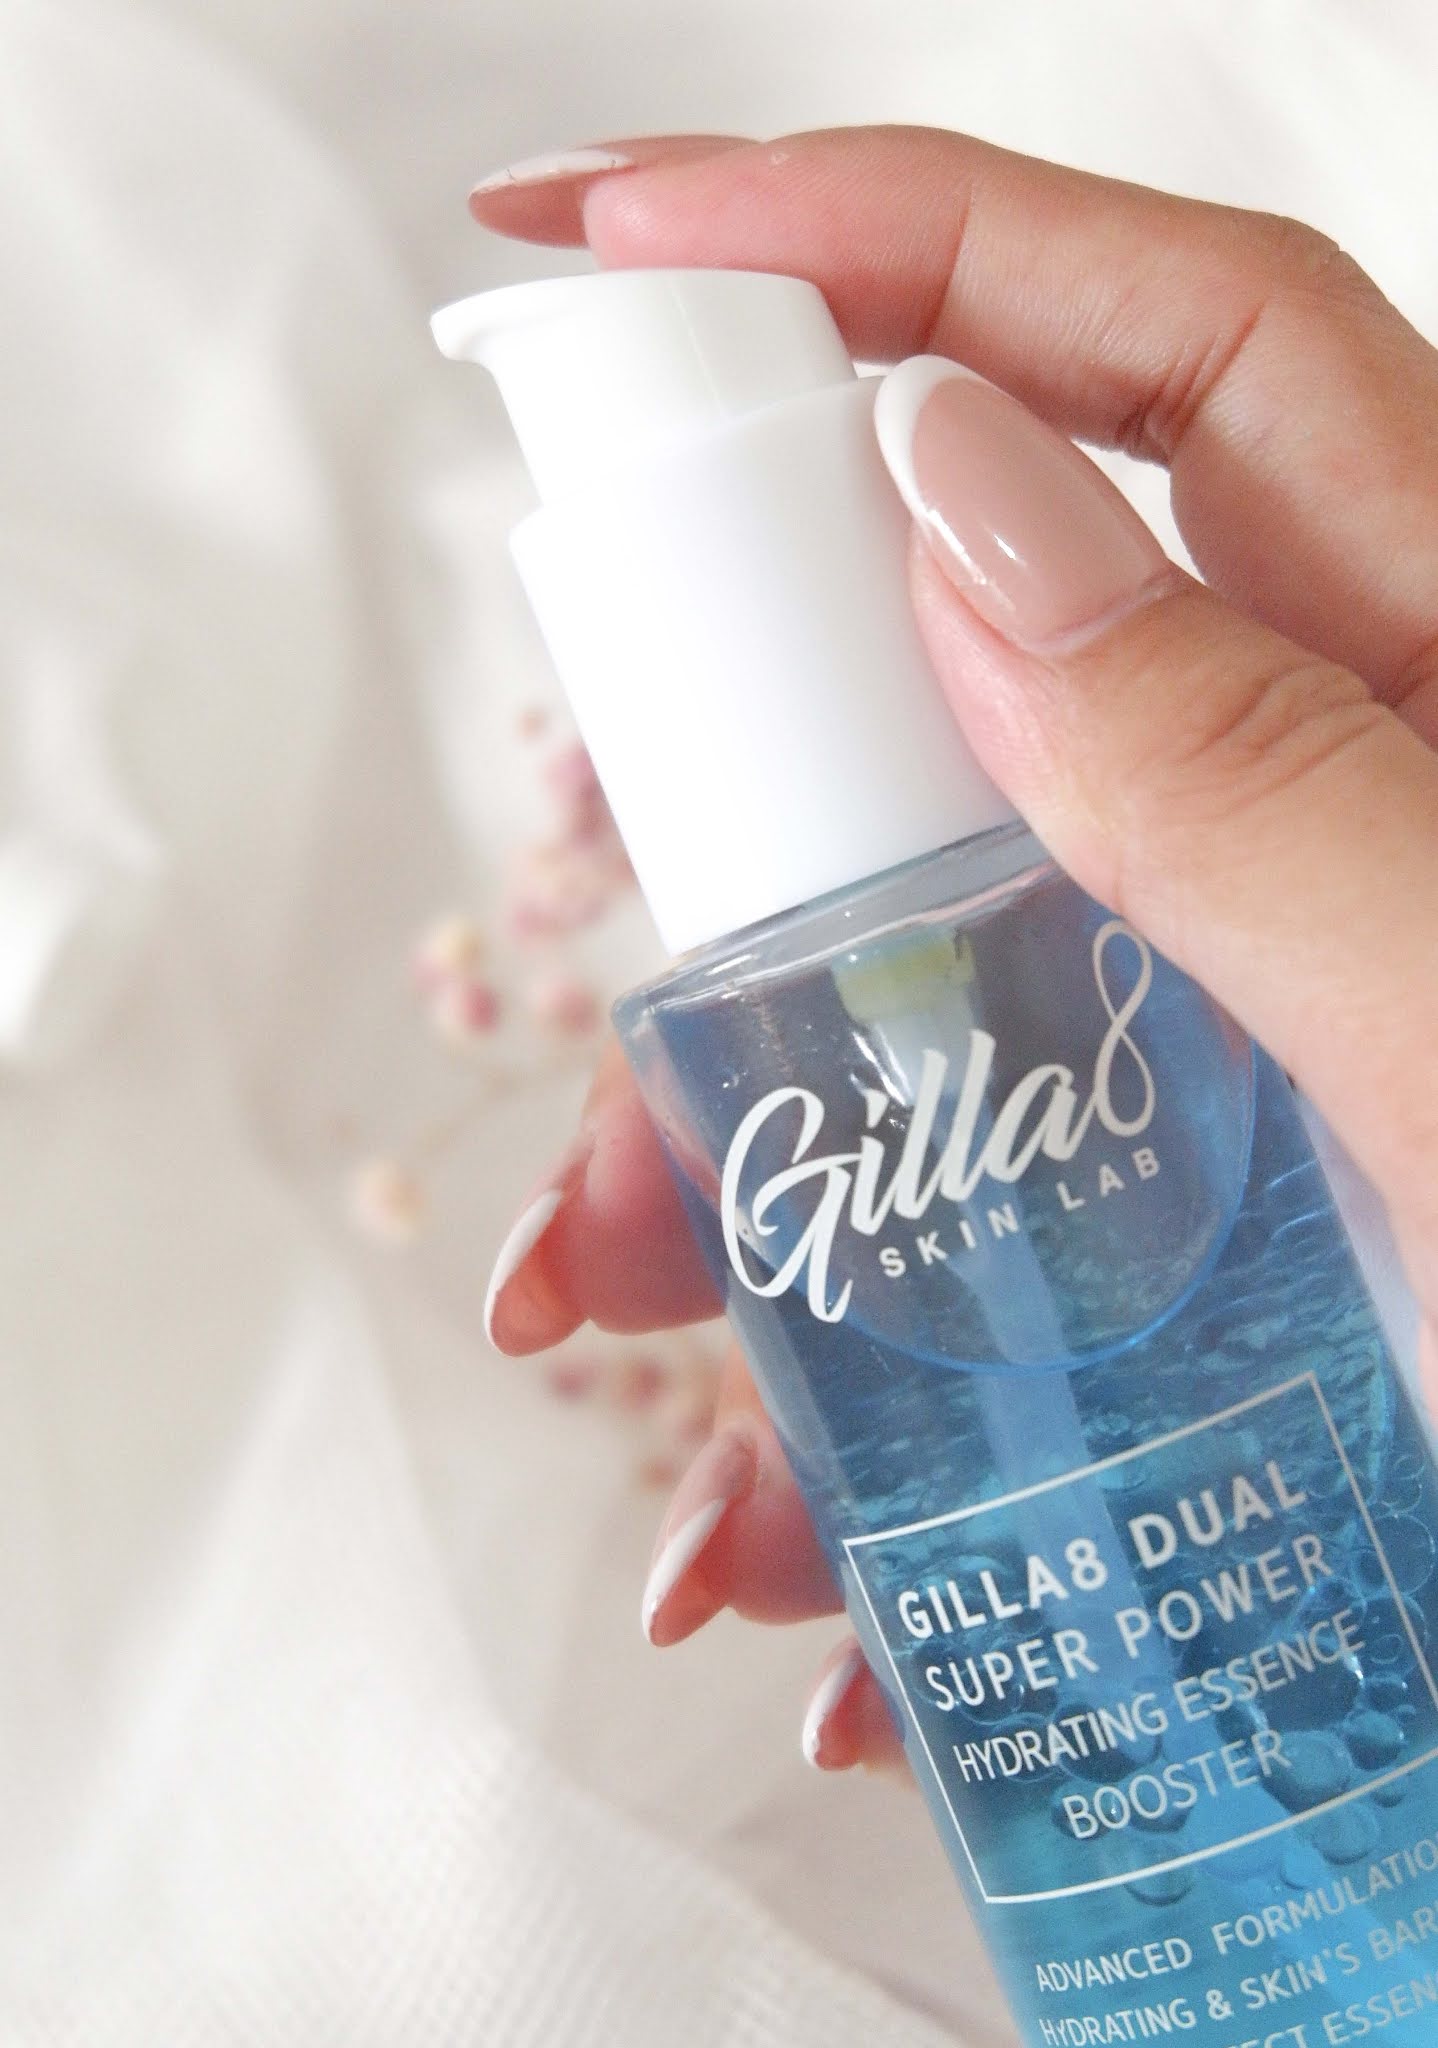 REVIEW OF GILLA8 DUAL SUPER POWER HYDRATING ESSENCE BOOSTER